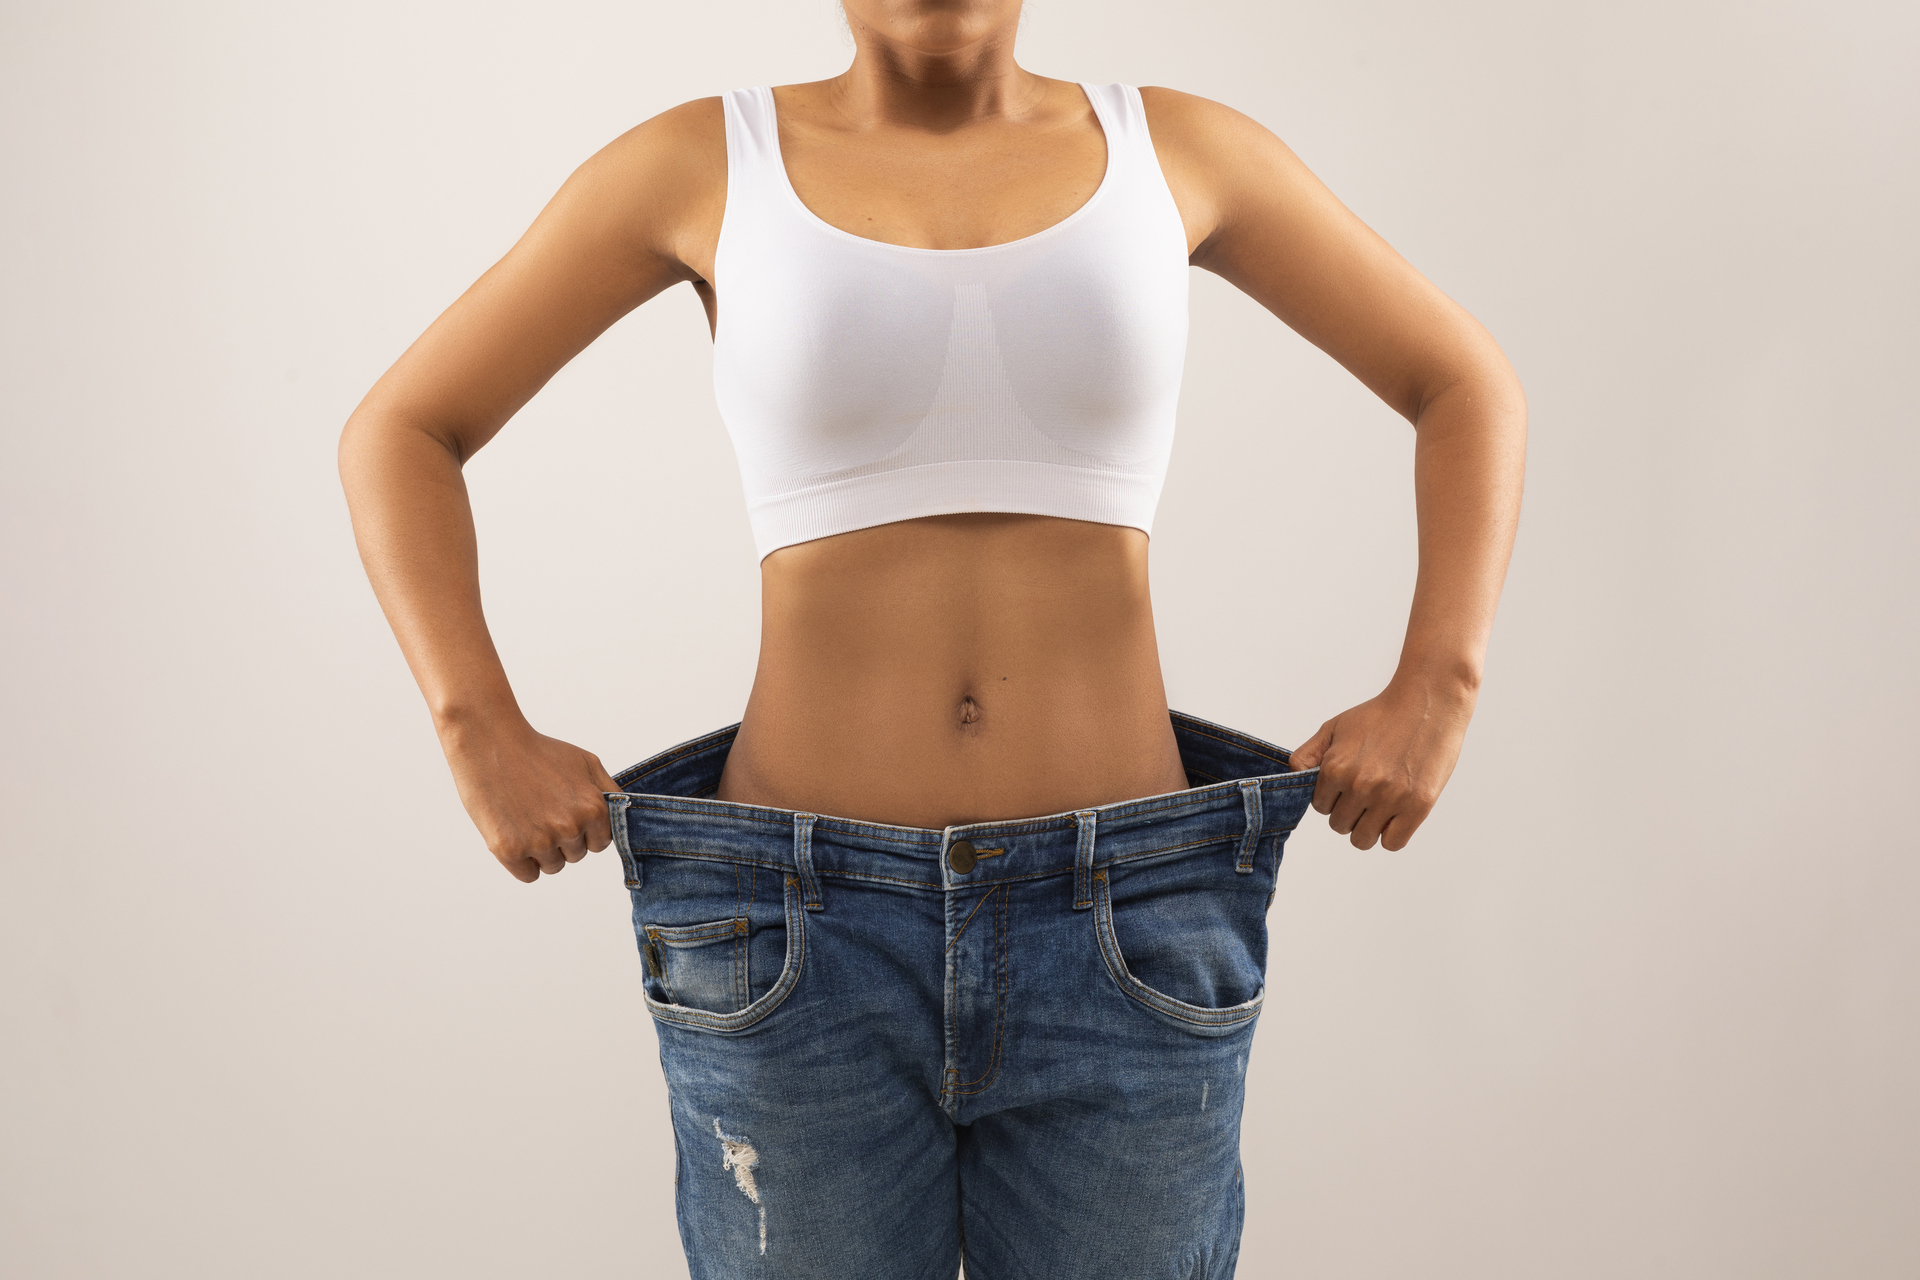 Tips for Successful Weight Loss within 3 Months